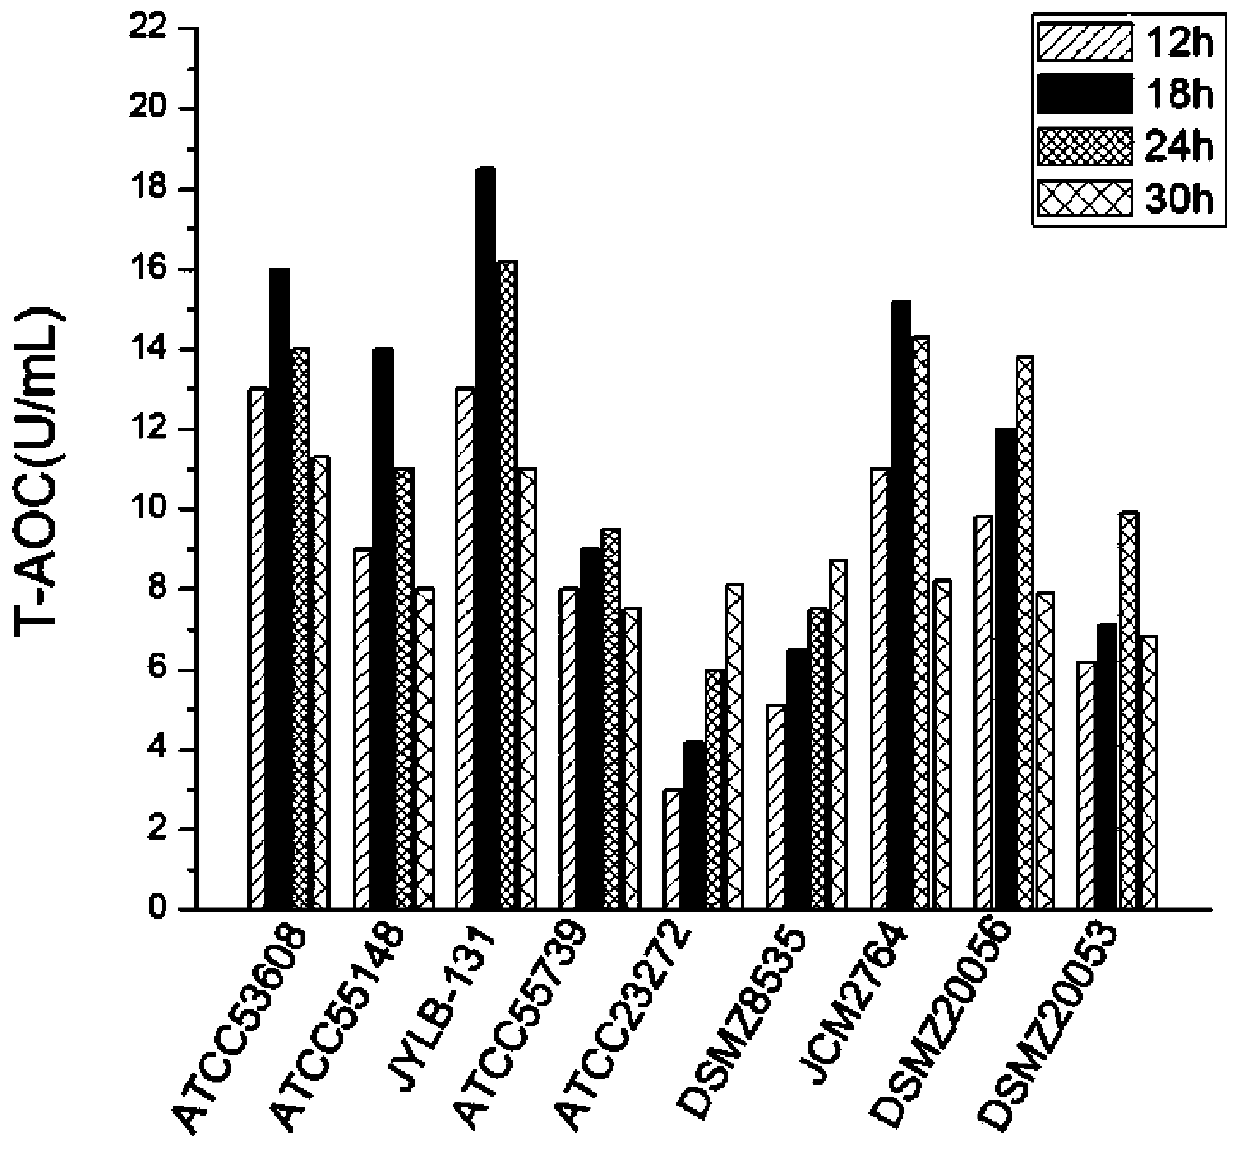 Lactobacillus reuteri JYLB-131 for increasing vitality of alcohol dehydrogenase of people after drinking, and application of lactobacillus reuteri JYLB-131 to foods and drugs